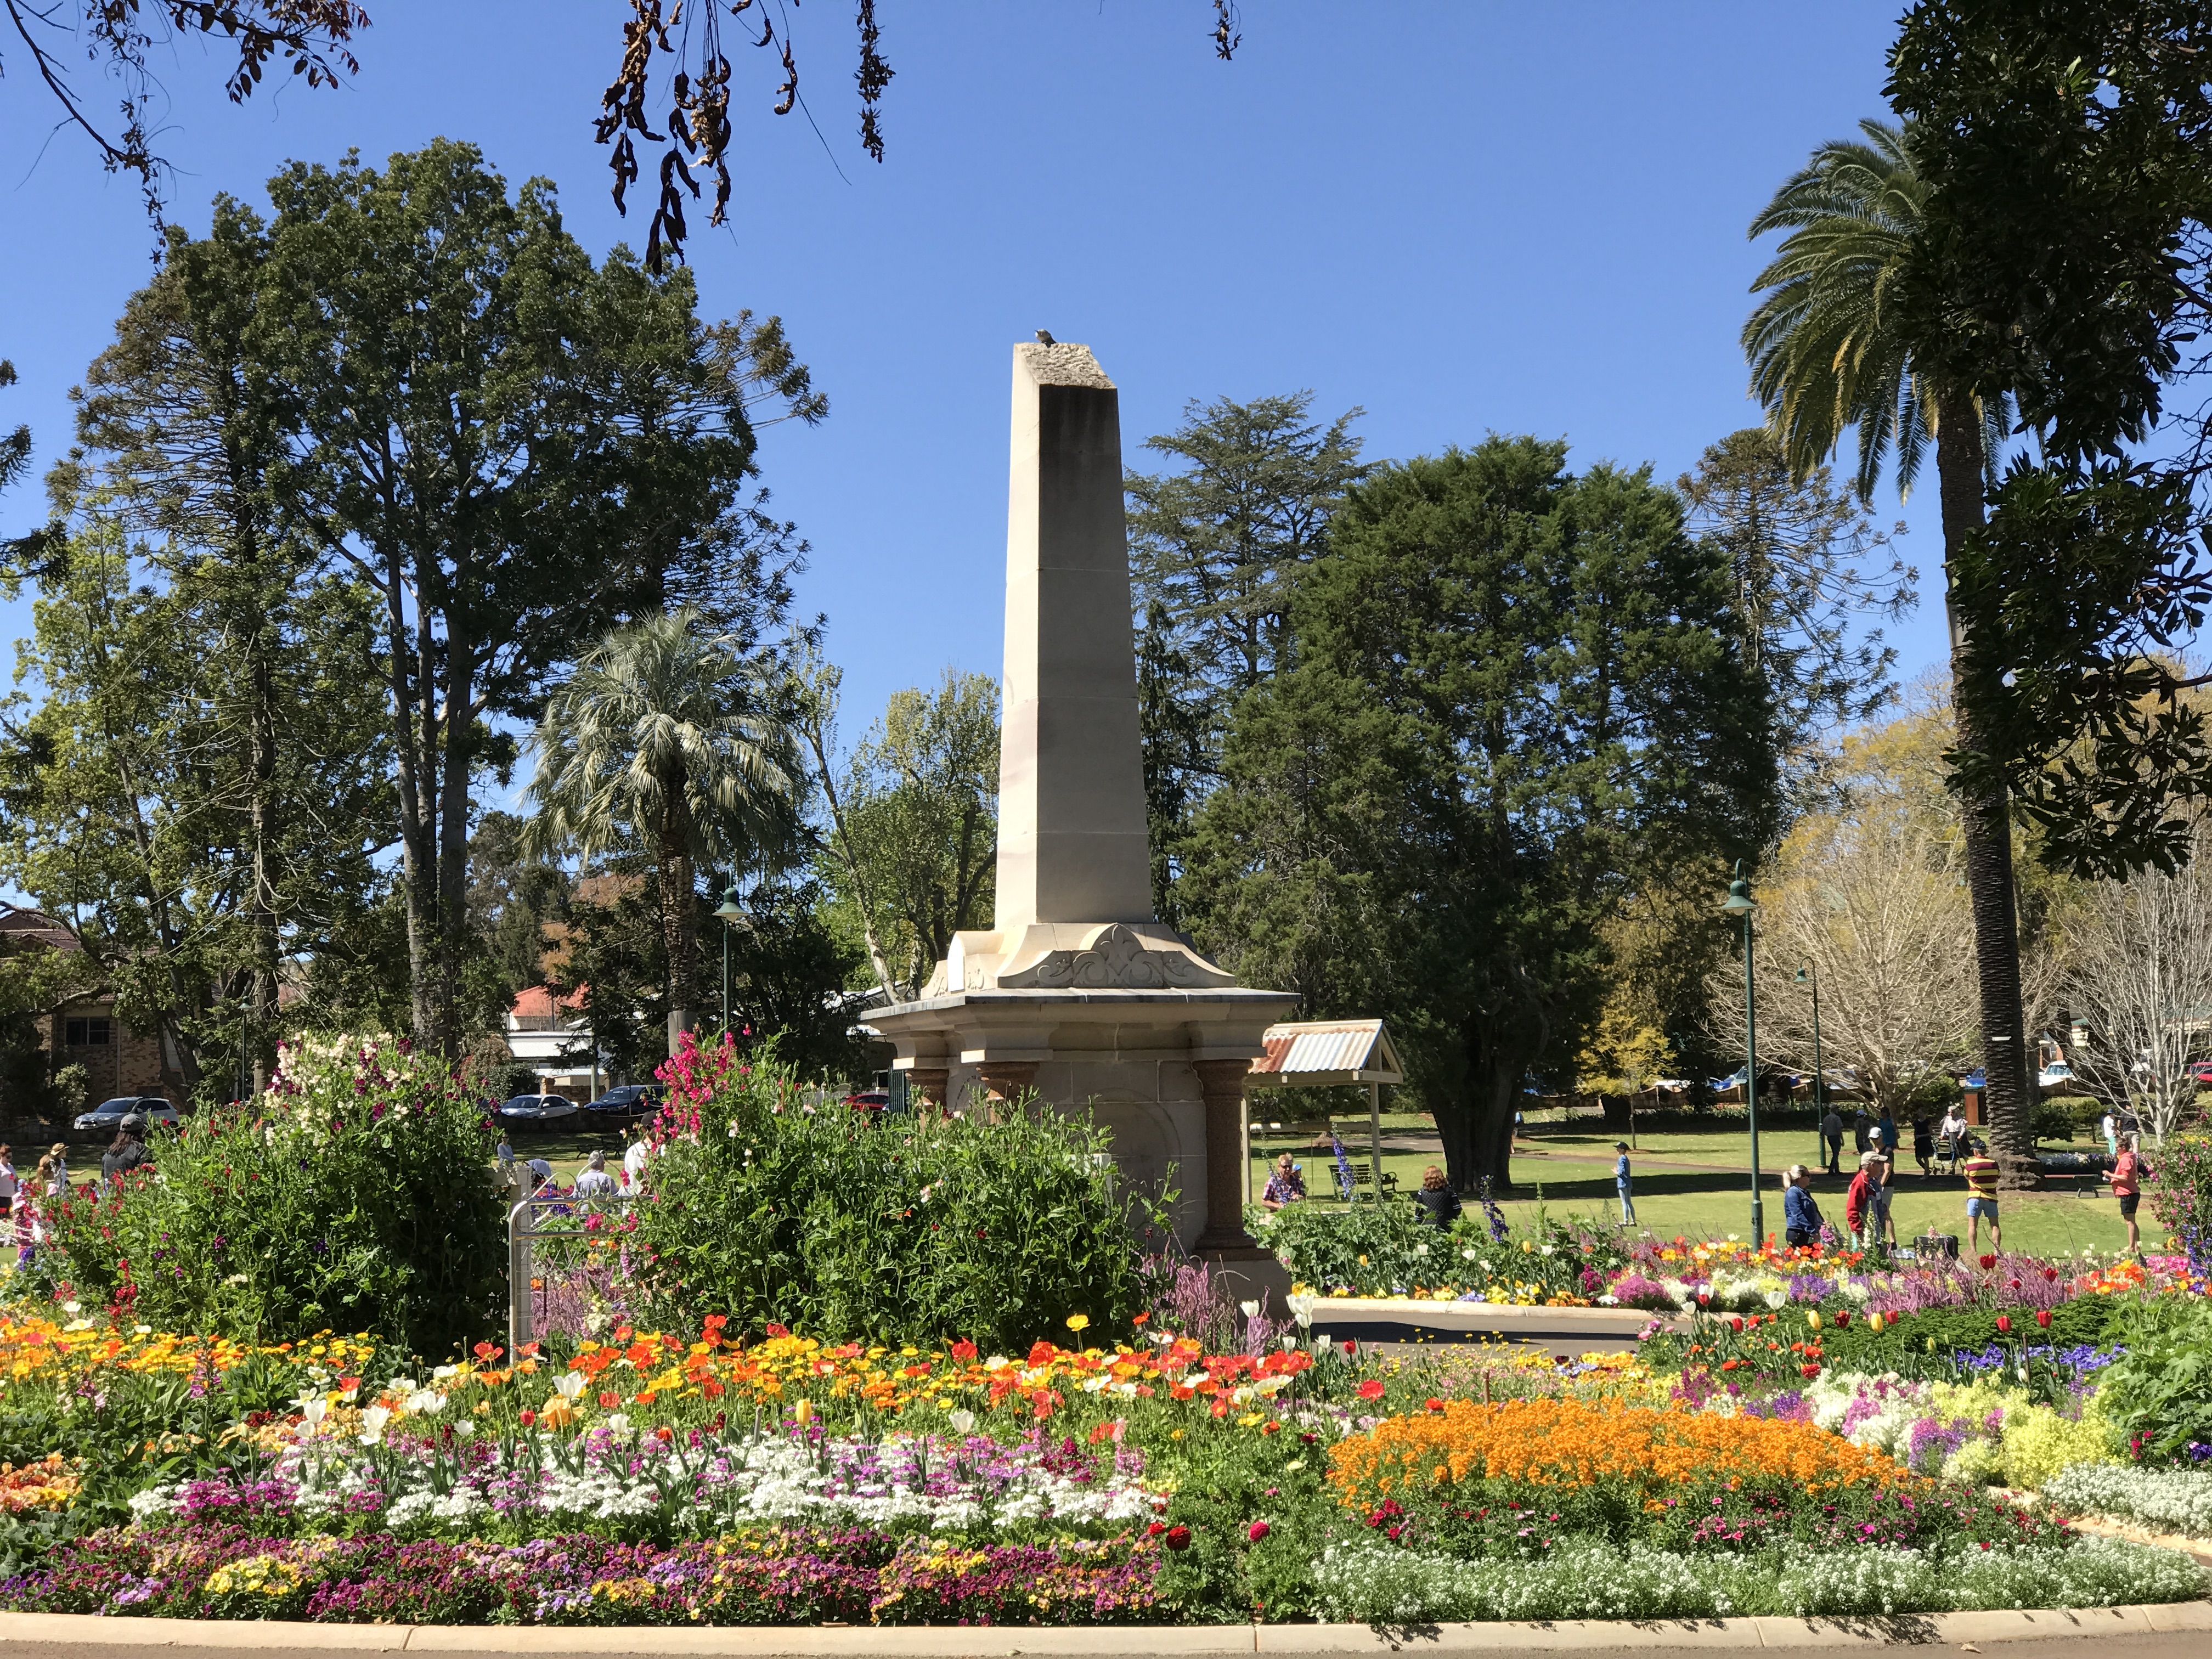 A photo of queens park in Toowoomba